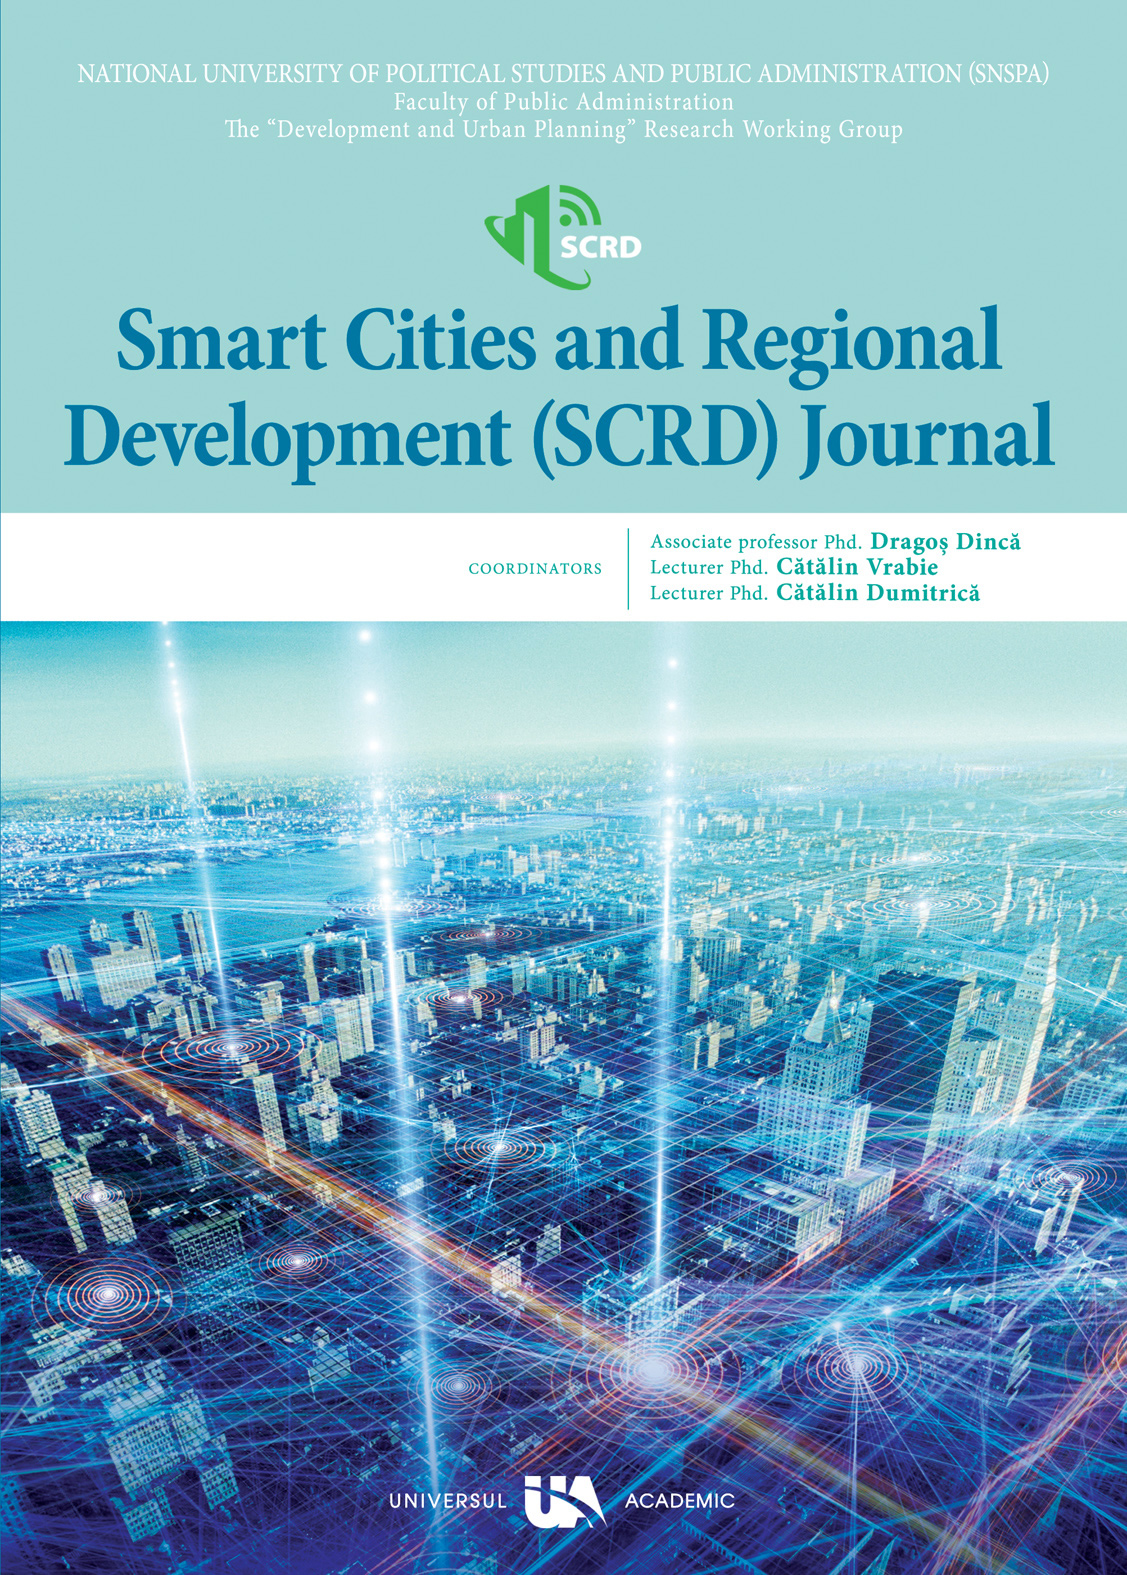 The future of work in the smart city: Managing virtual work by leveraging smart cities to achieve organizational strategy Cover Image